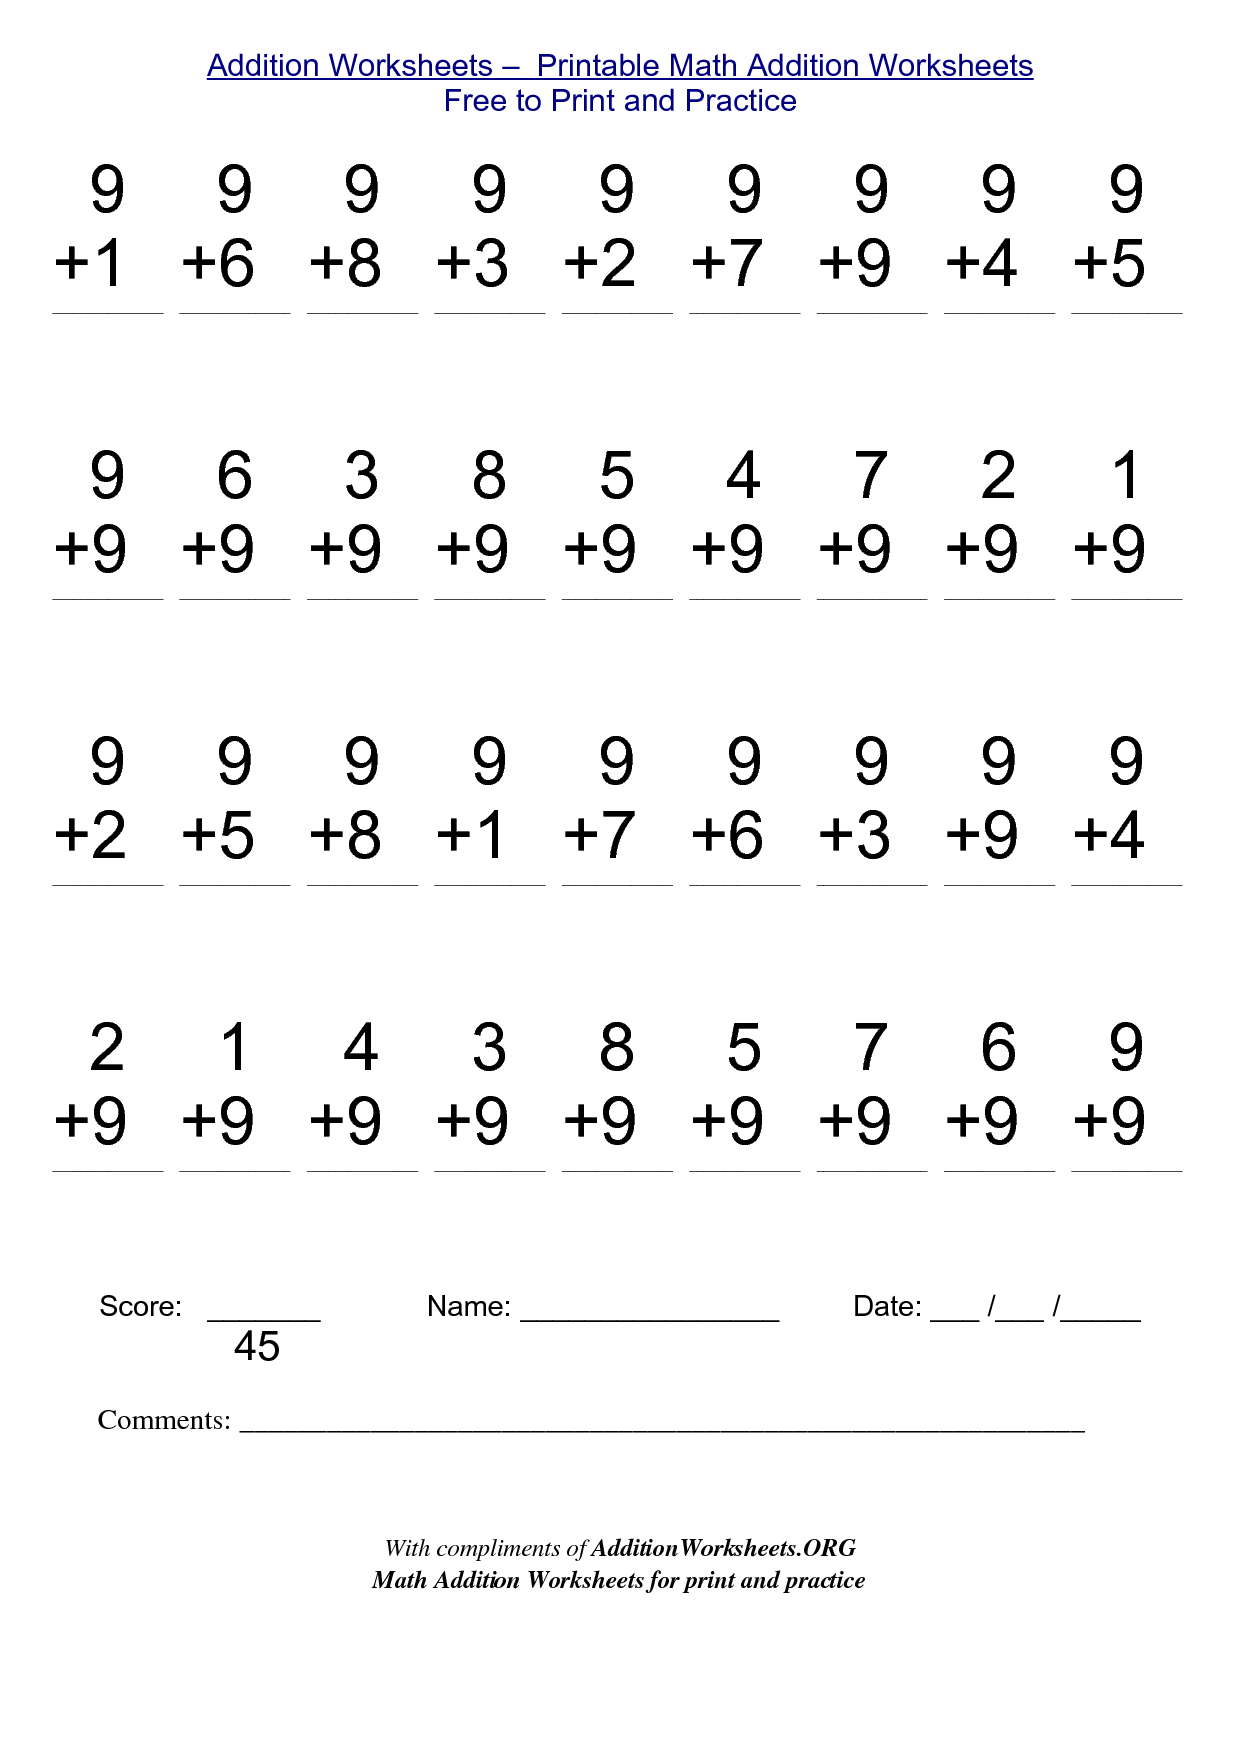 Math Worksheets For Free To Print - Alot | Me | Pinterest | Math - Free Printable Math Worksheets For 2Nd Grade